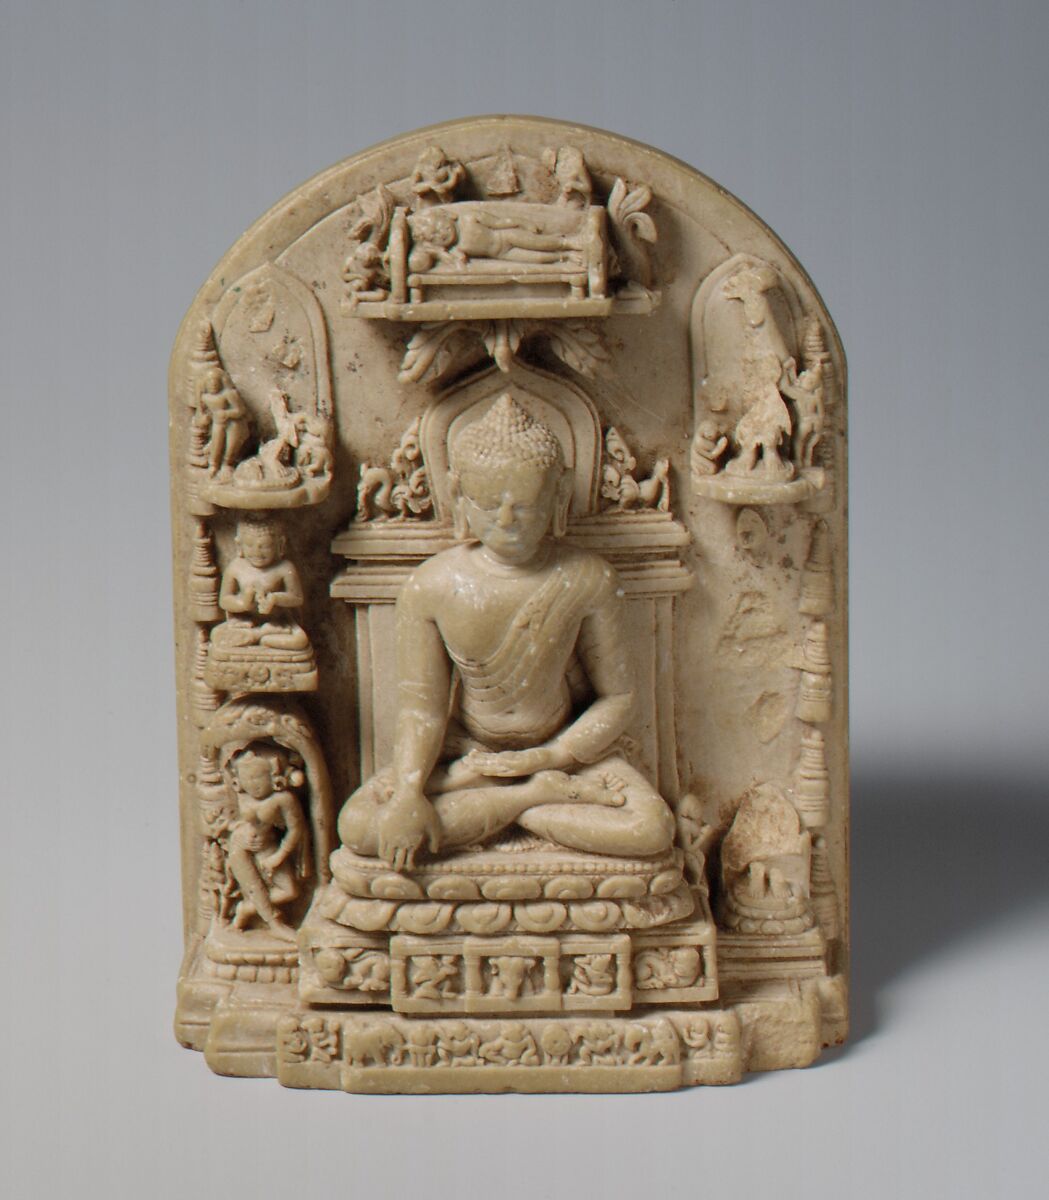 Plaque with Scenes from the Life of the Buddha, Mudstone, India (Bihar or West Bengal) 